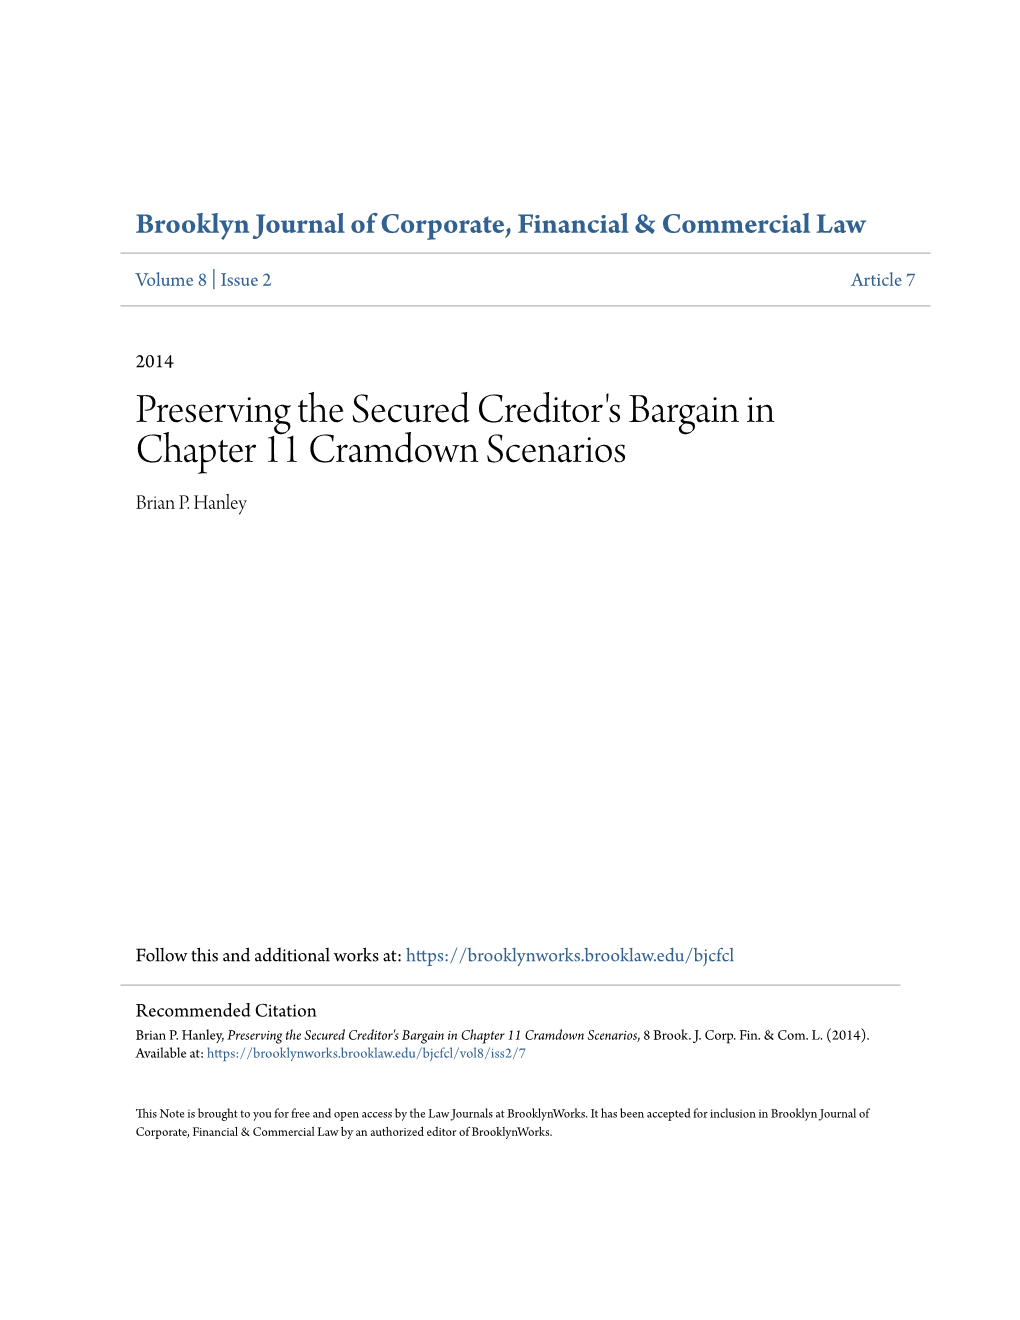 Preserving the Secured Creditor's Bargain in Chapter 11 Cramdown Scenarios Brian P